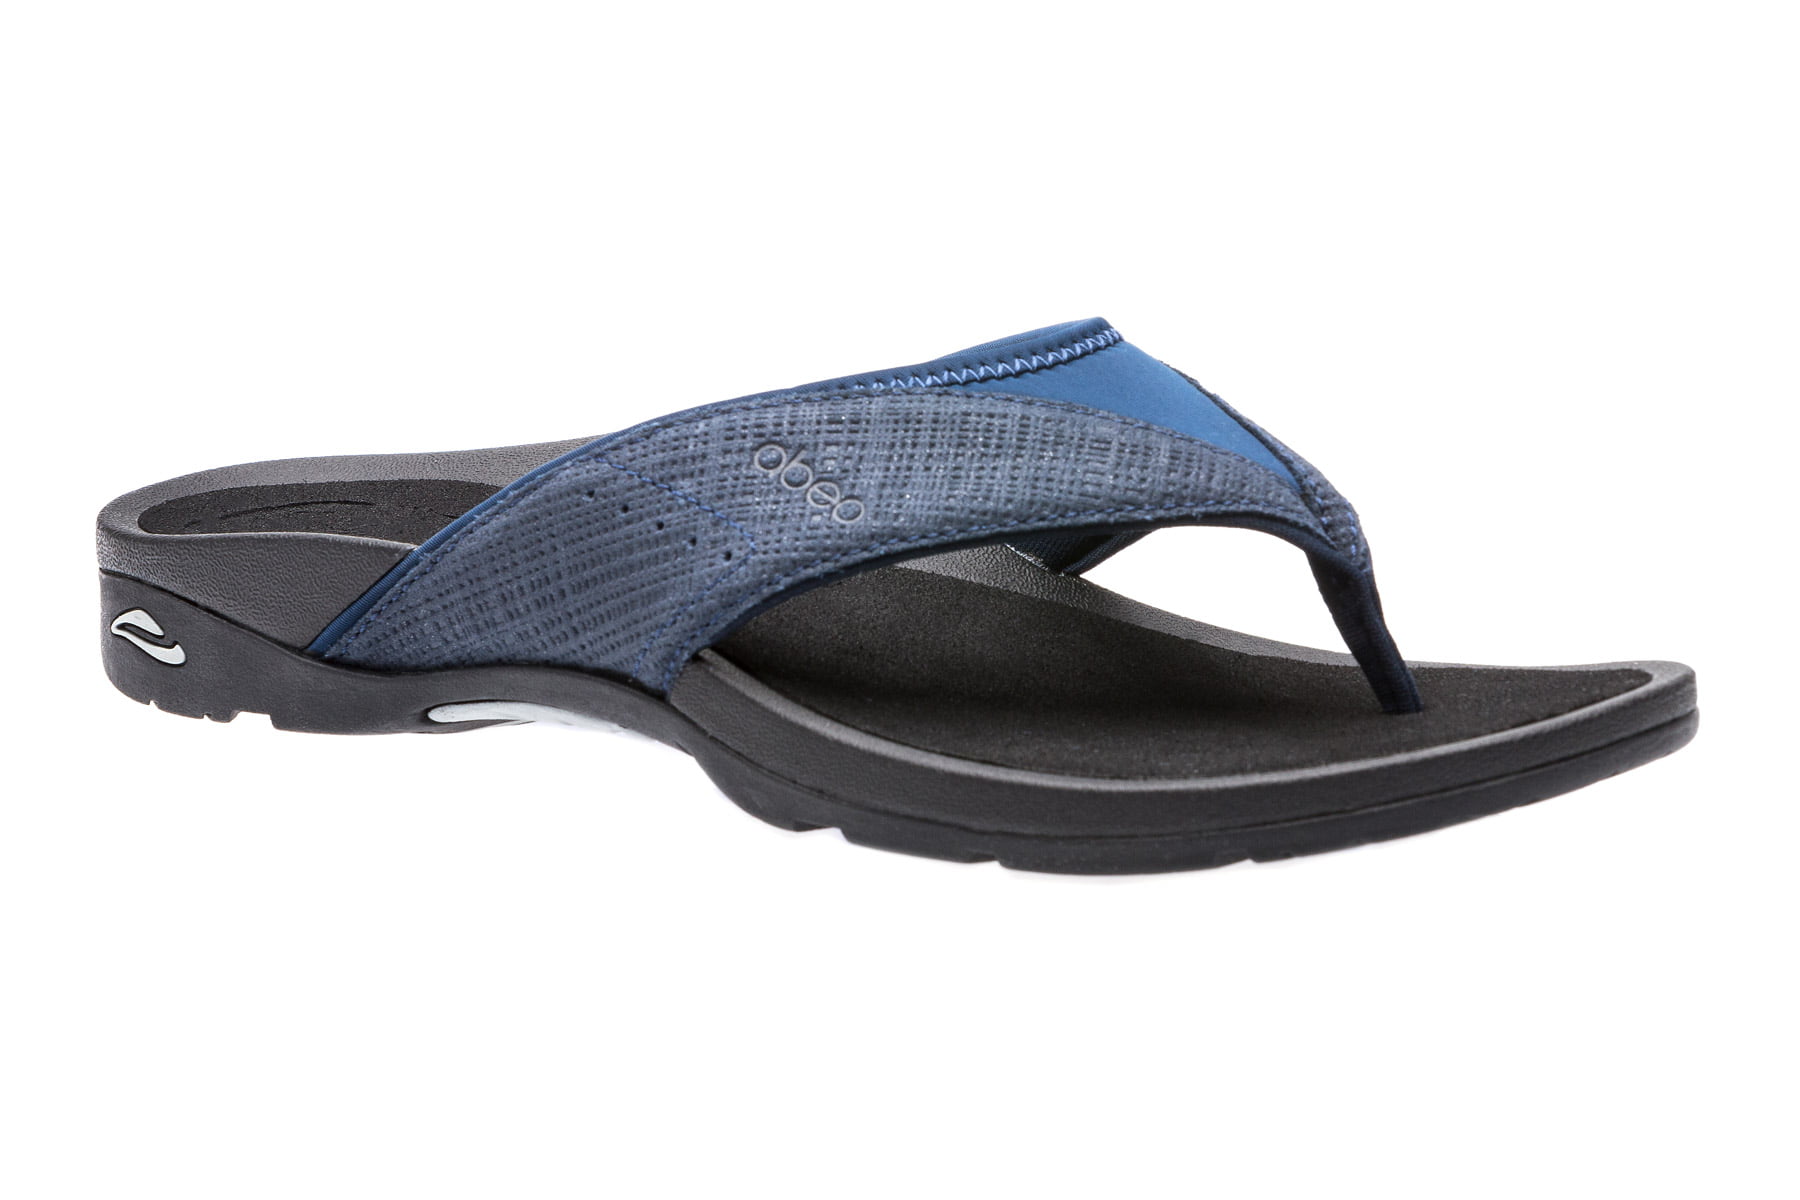 Are Abeo Sandals Waterproof?